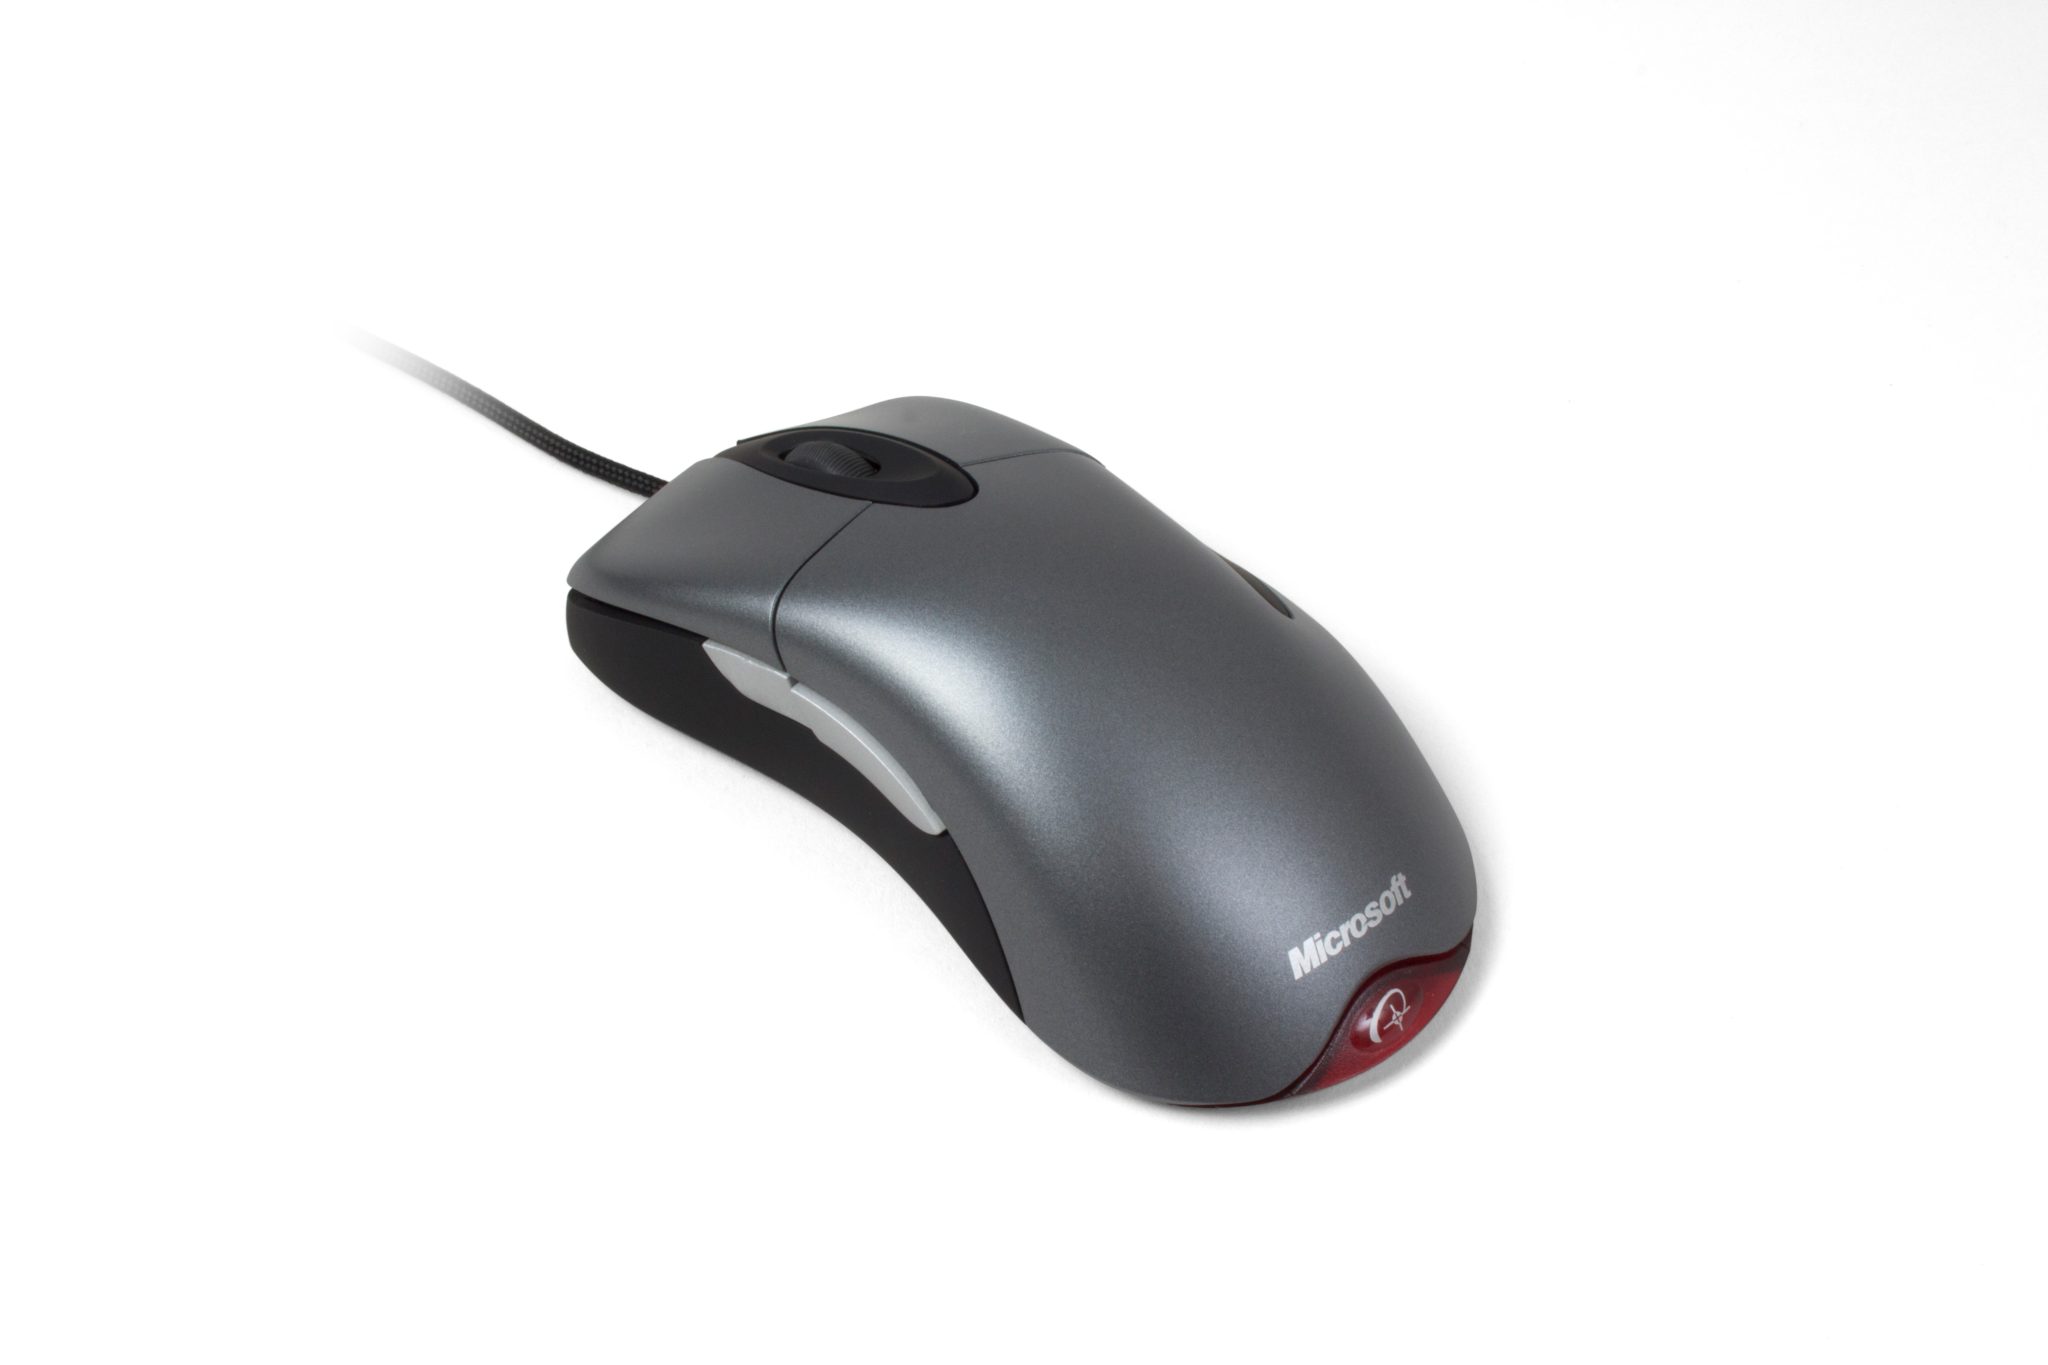 A legend reborn: Microsoft brings back the iconic mouse, the Classic IntelliMouse